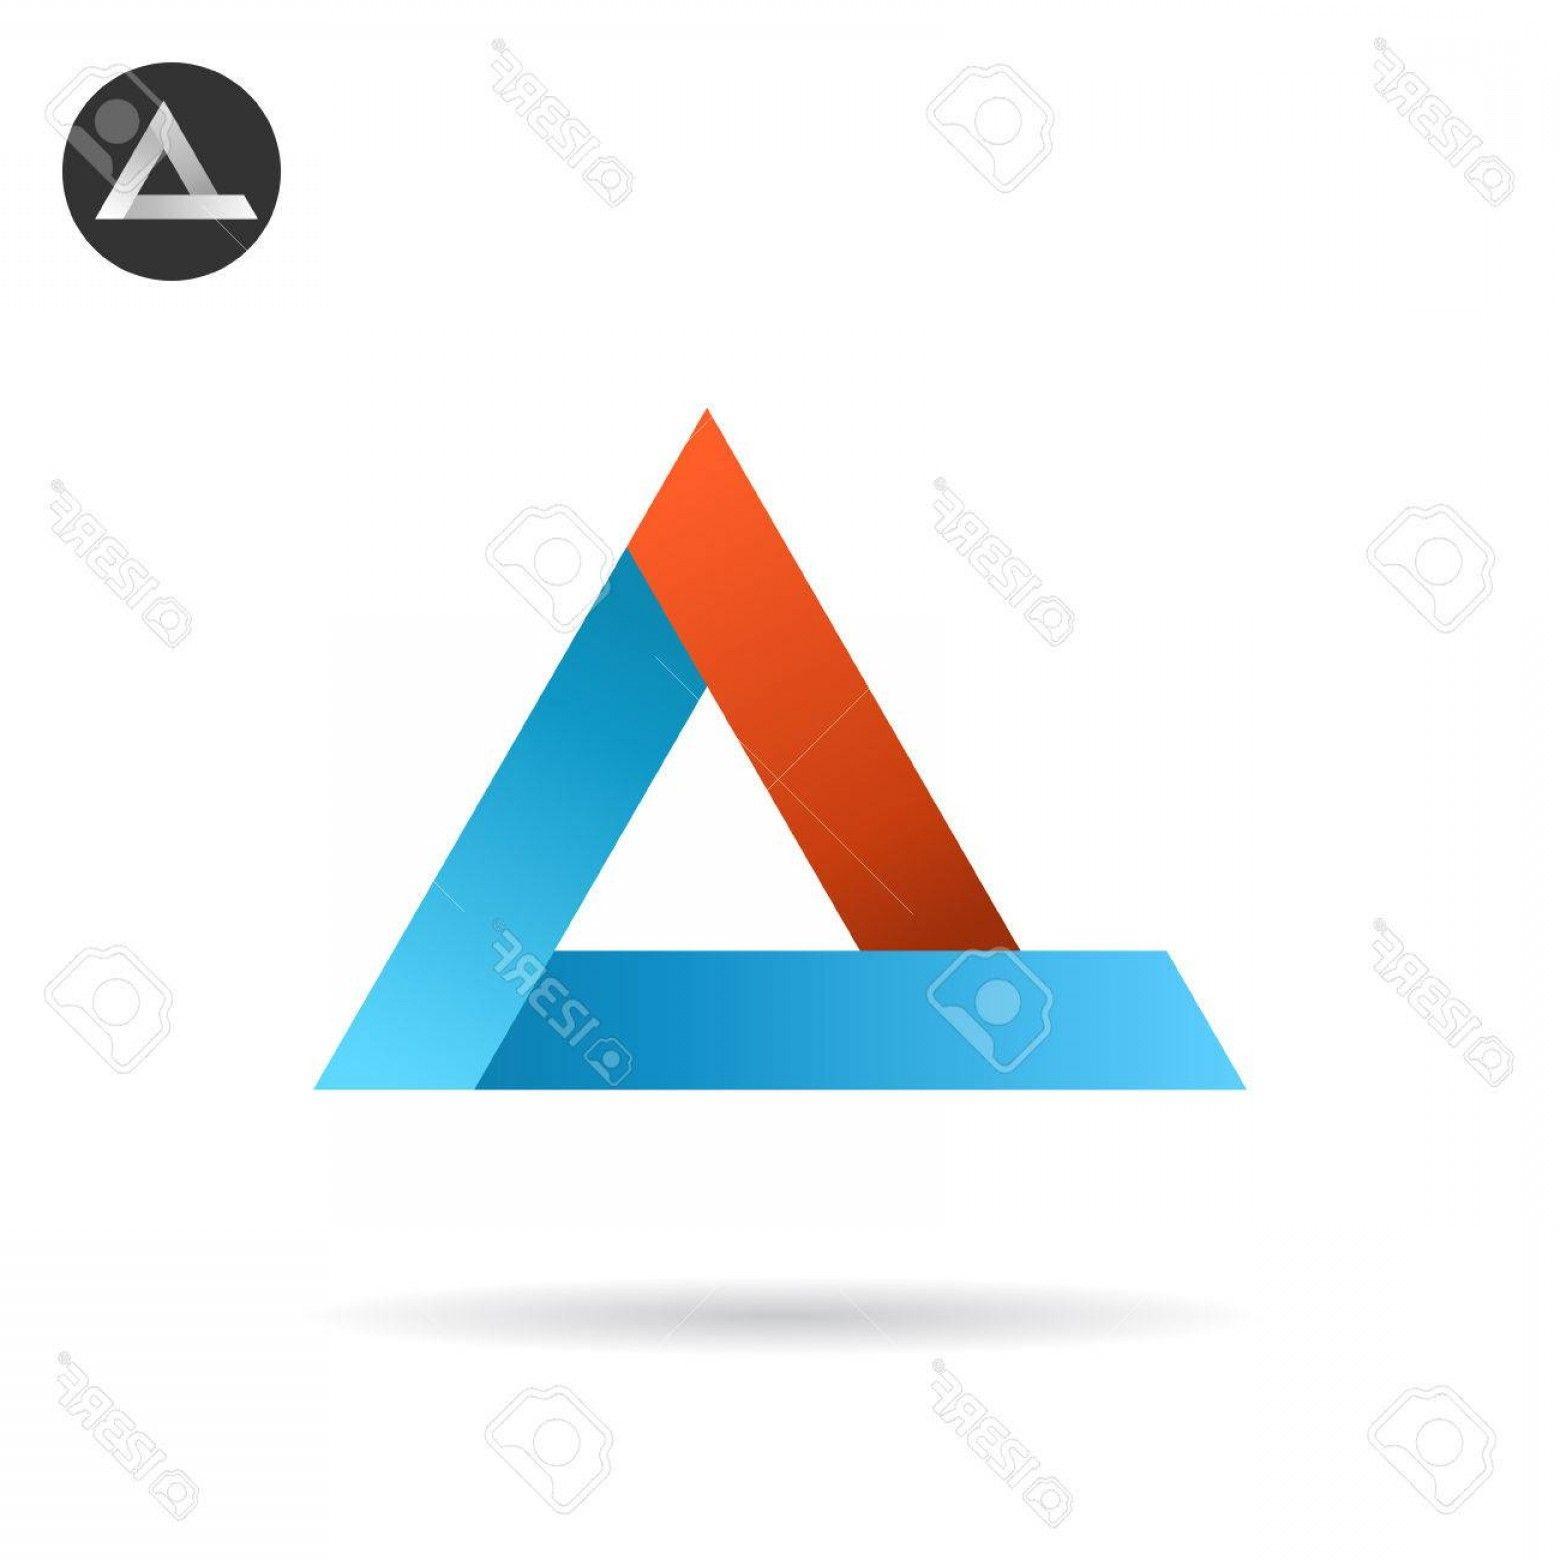 Red White Blue Arrow Logo - Photostock Vector Delta Arrow Logo In Ribbon Style Red And Blue ...